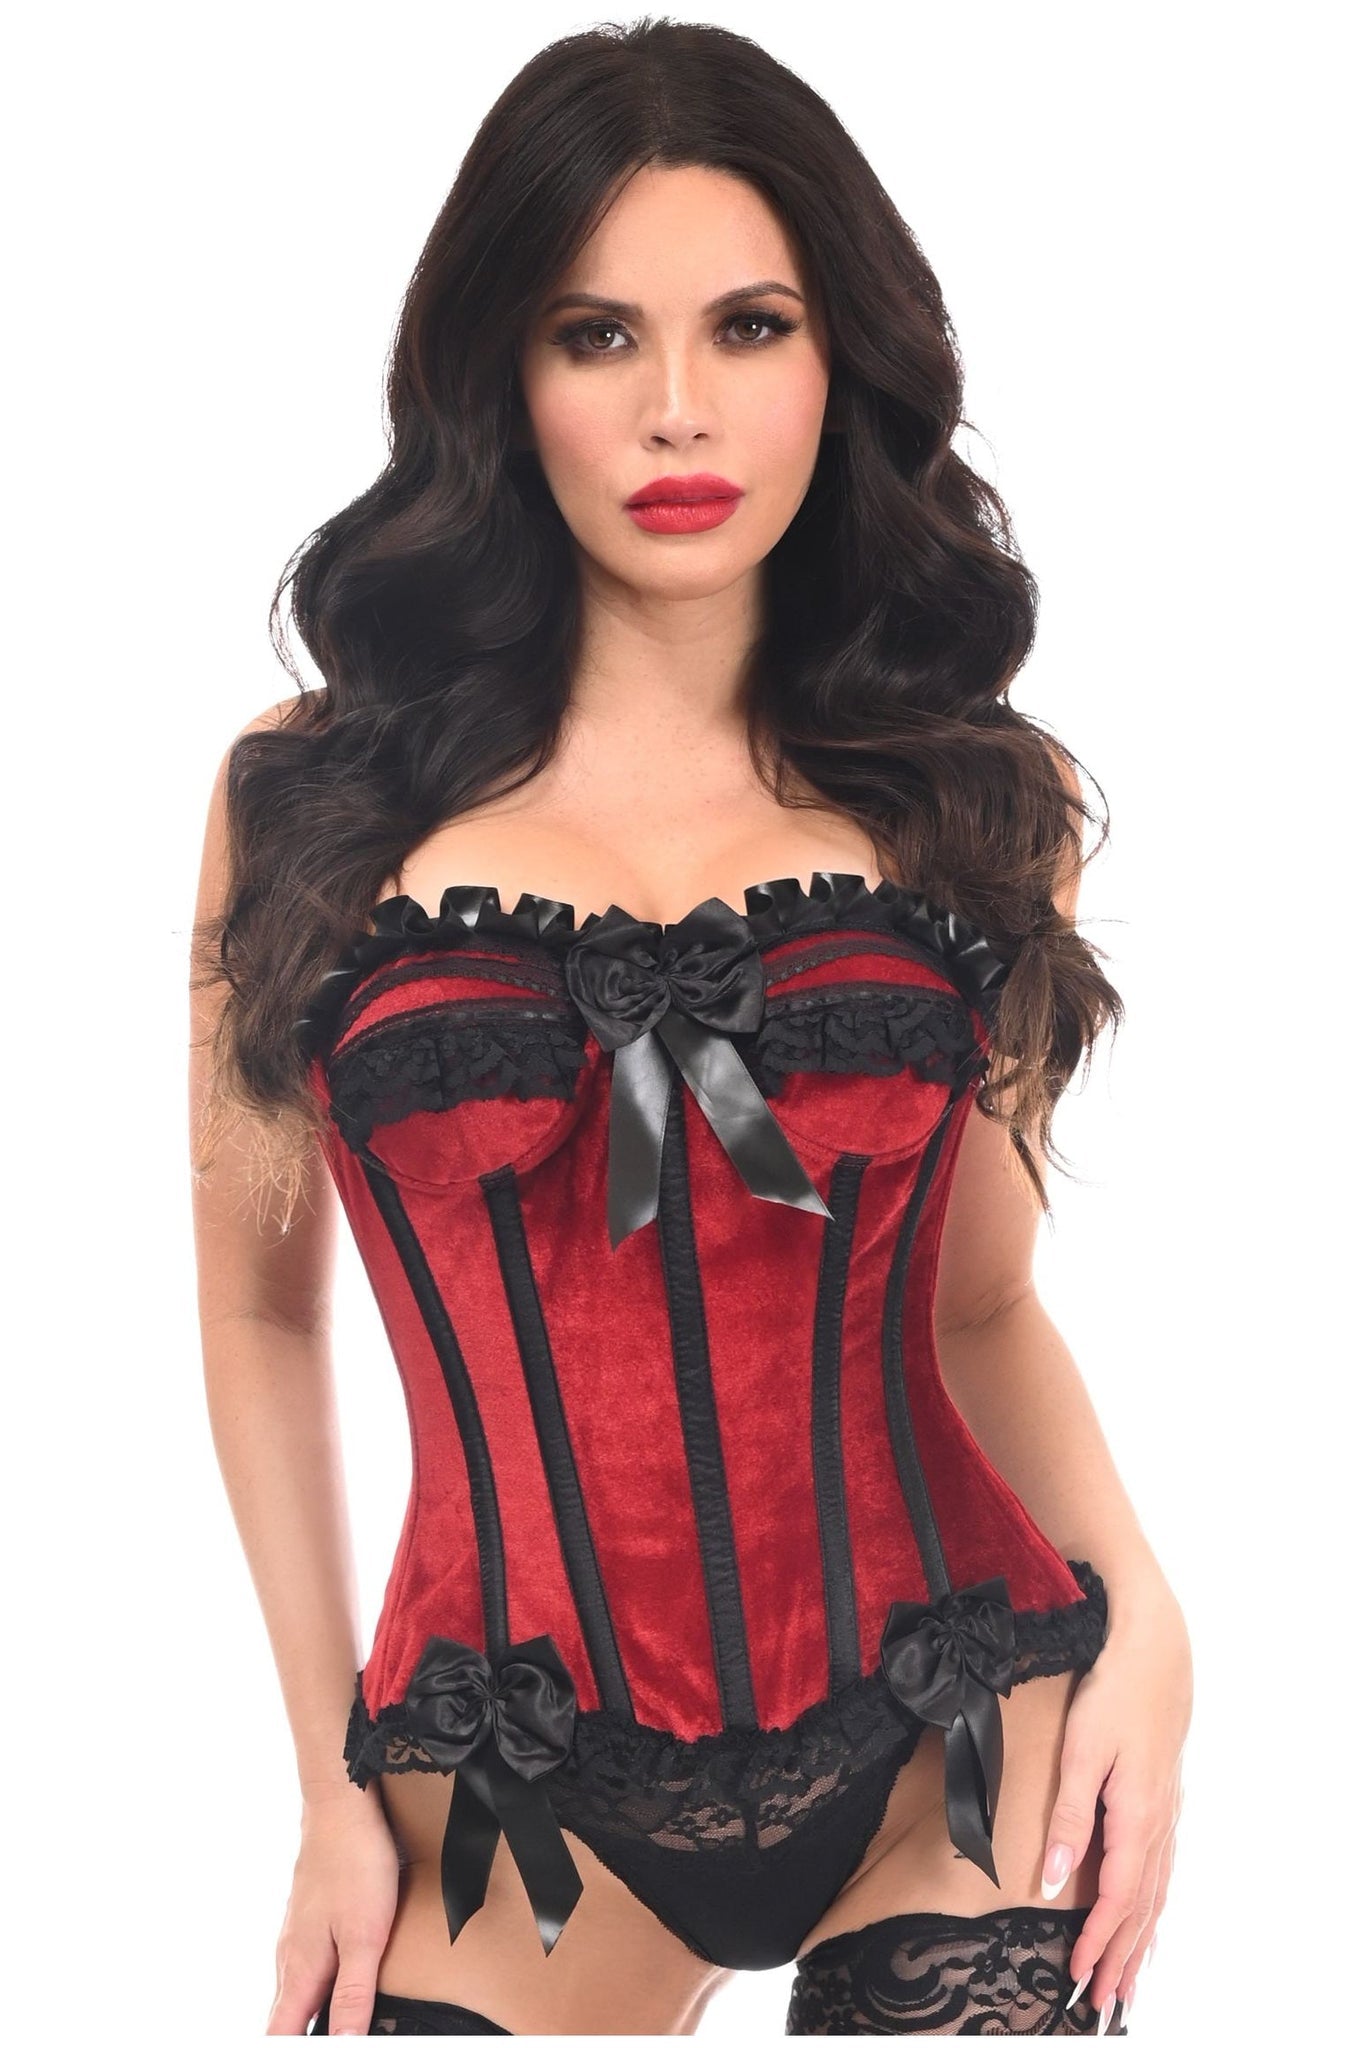 Top Drawer Velvet Steel Boned Burlesque Corset by Daisy Corsets in Purple or Red in Size S, M, L, XL, 2X, 3X, 4X, 5X, or 6X